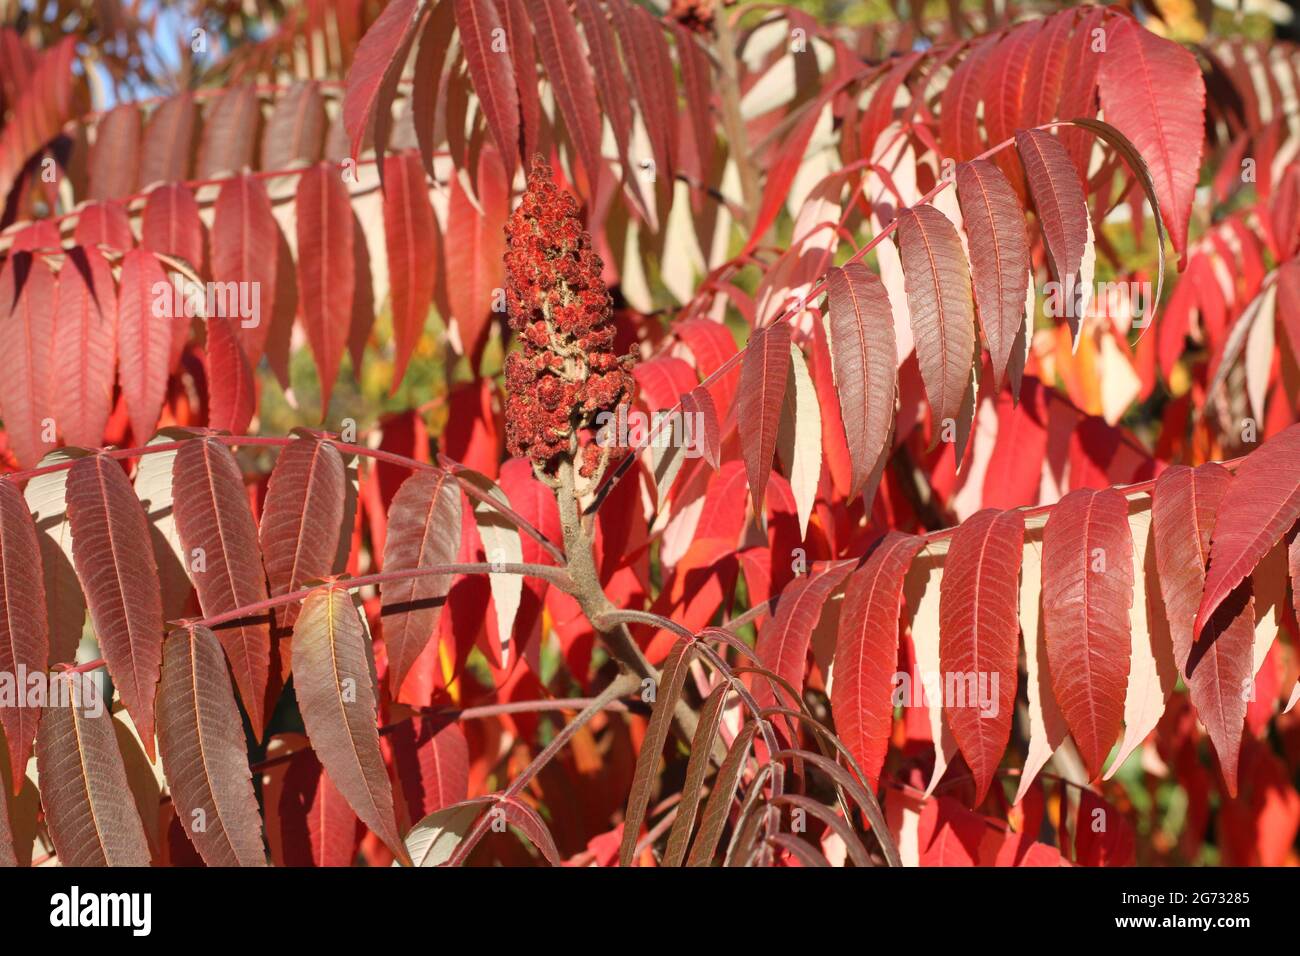 Autumn - purple and red leaves on sumac tree against green trees. Closeup Stock Photo